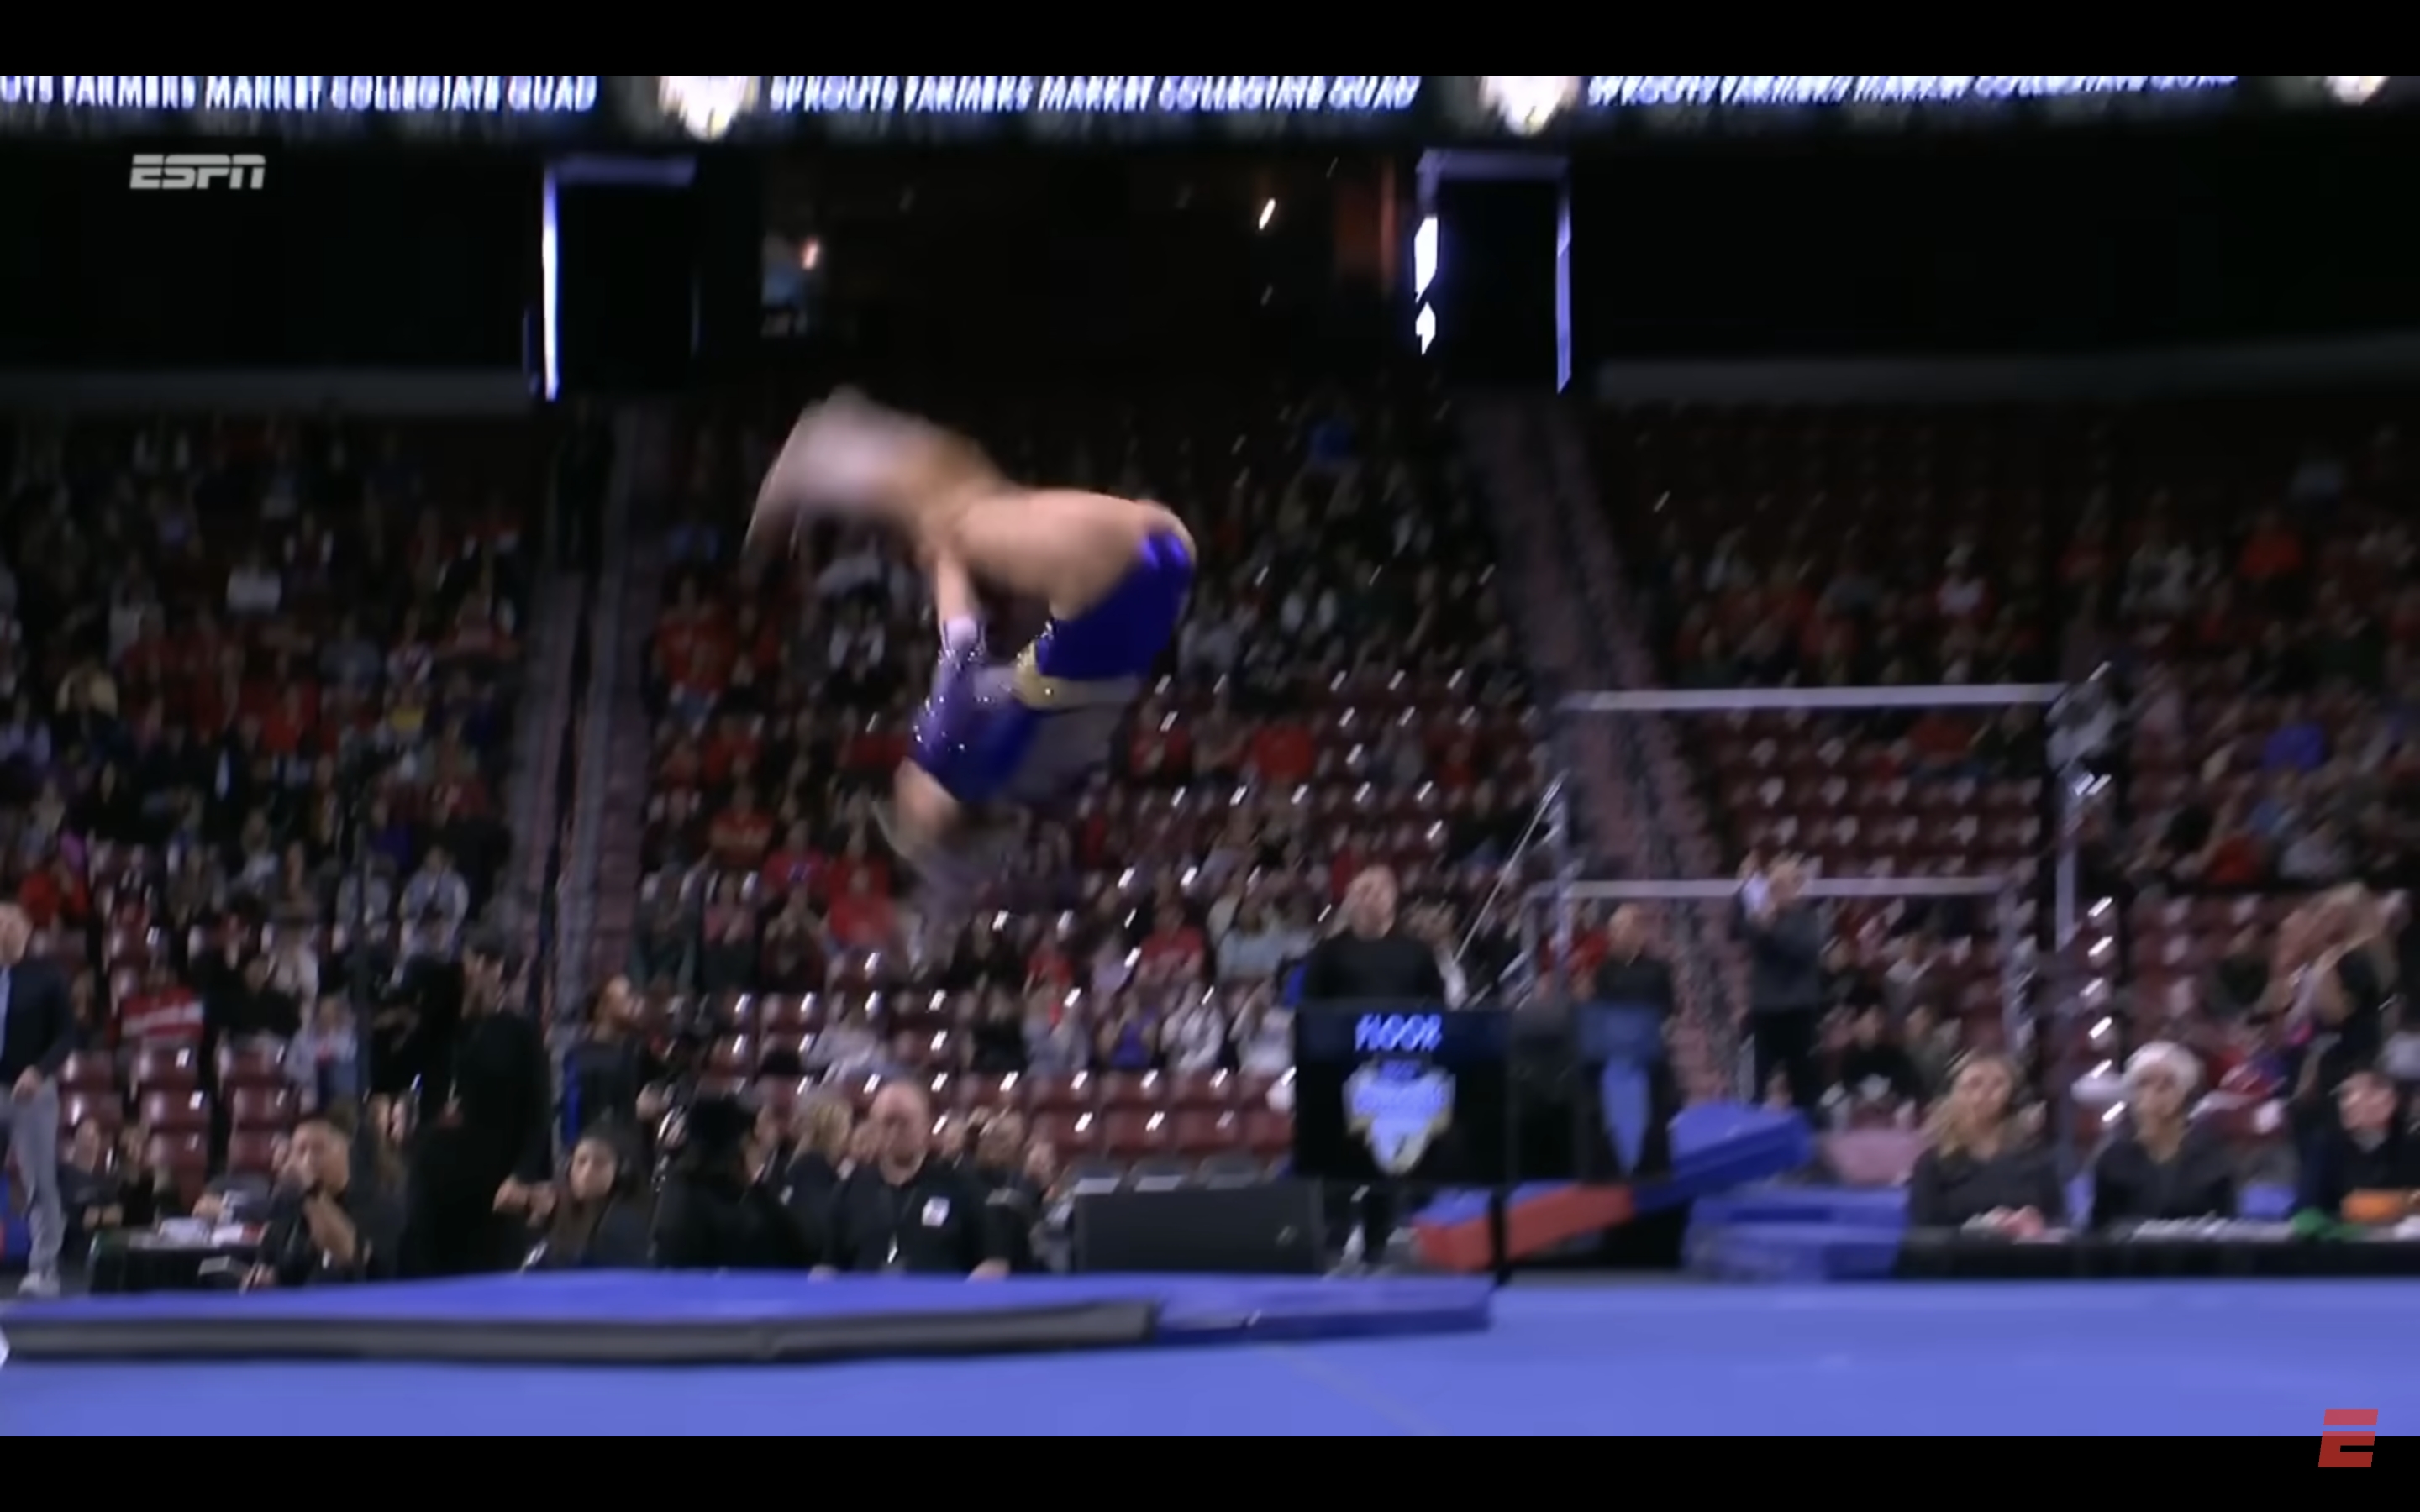 Dunne scored a 9.850 for her floor routine